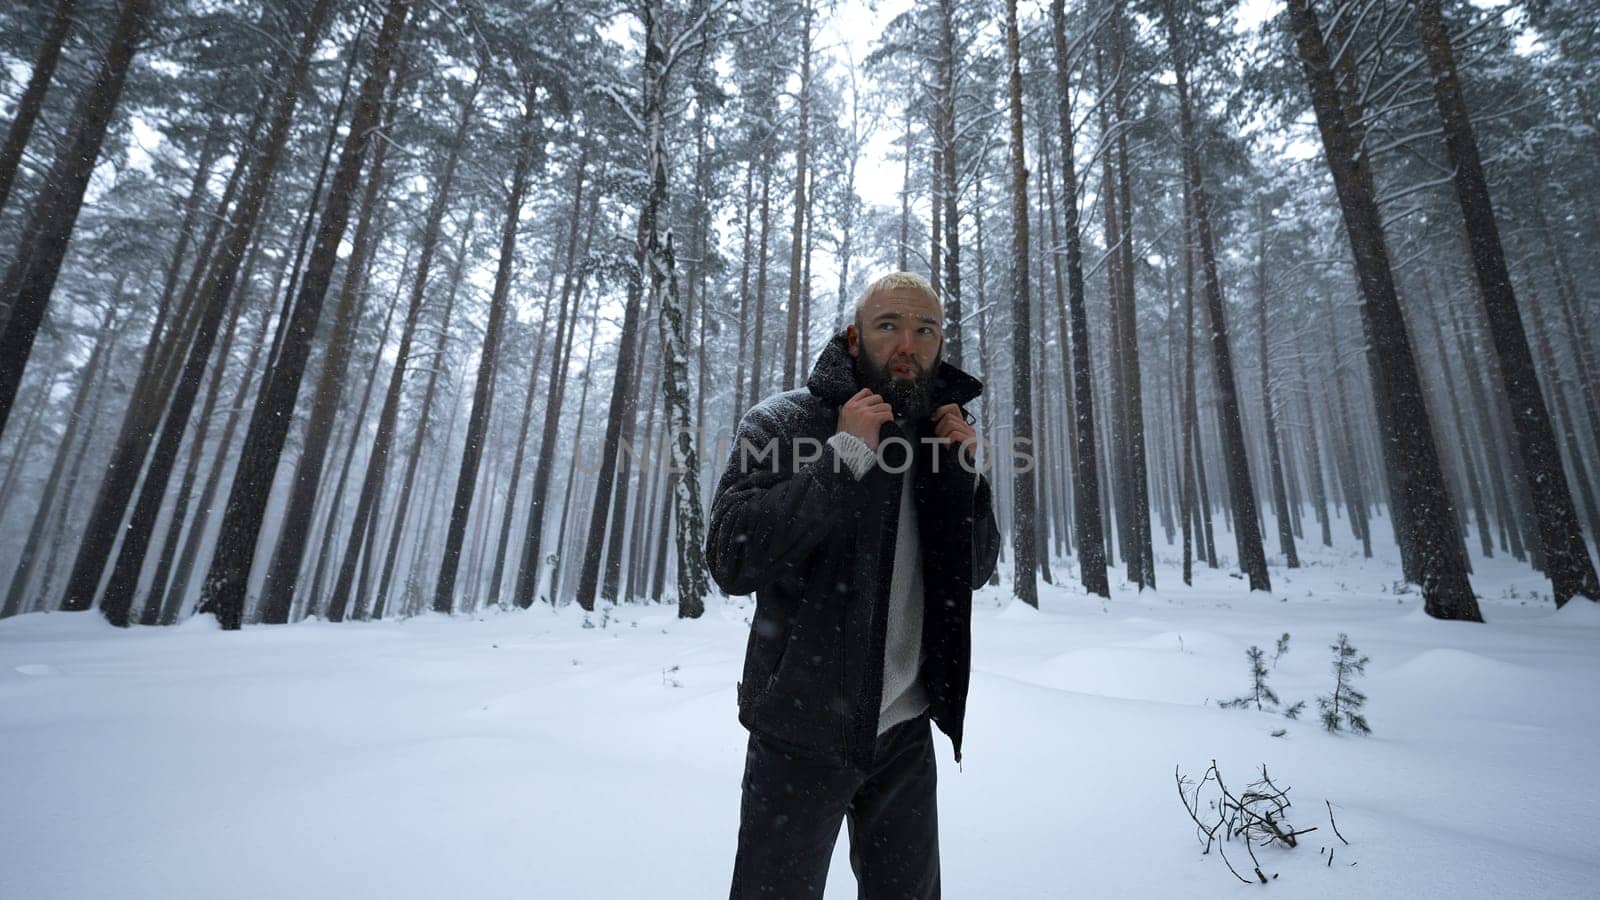 Stylish man poses in winter forest. Media. Shooting stylish man in winter forest. Fashion shooting of man in winter forest.